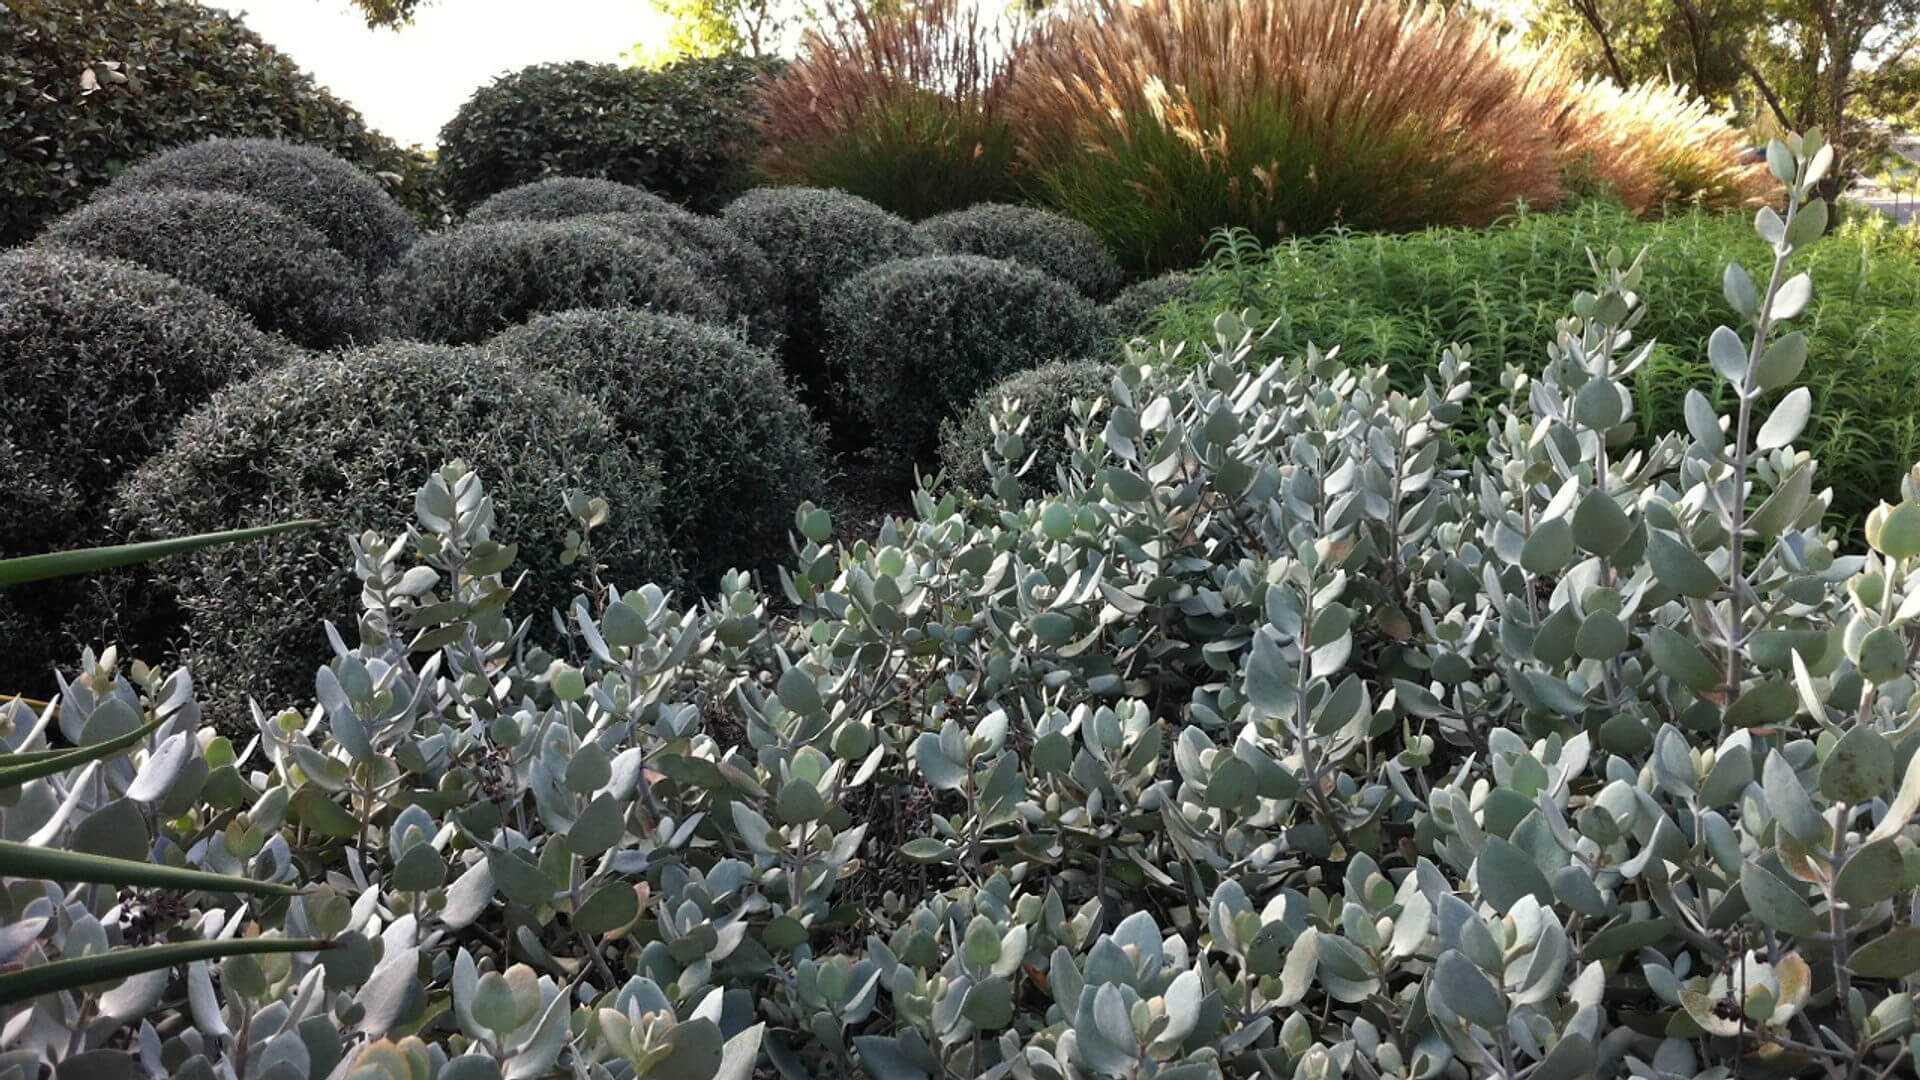 Picture of Silver Spoon, Corokia and Miscanthus bushes